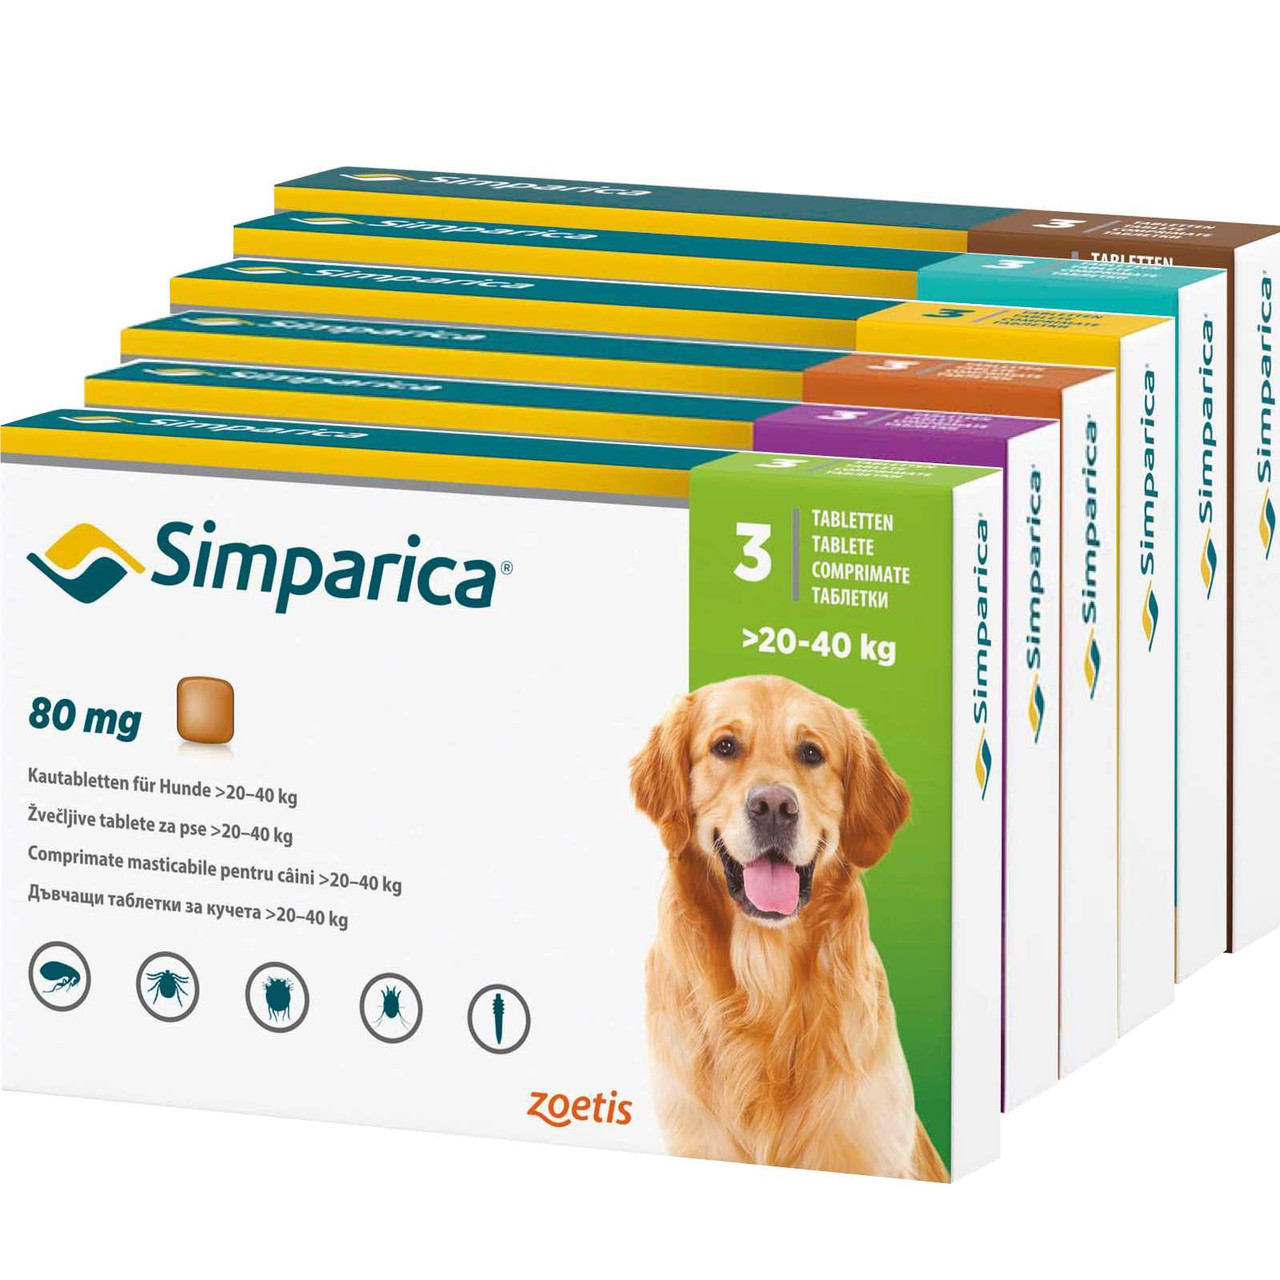 20% Off Simparica Flea and Tick Chewable Tablets for Dogs at Atlantic Pet Products